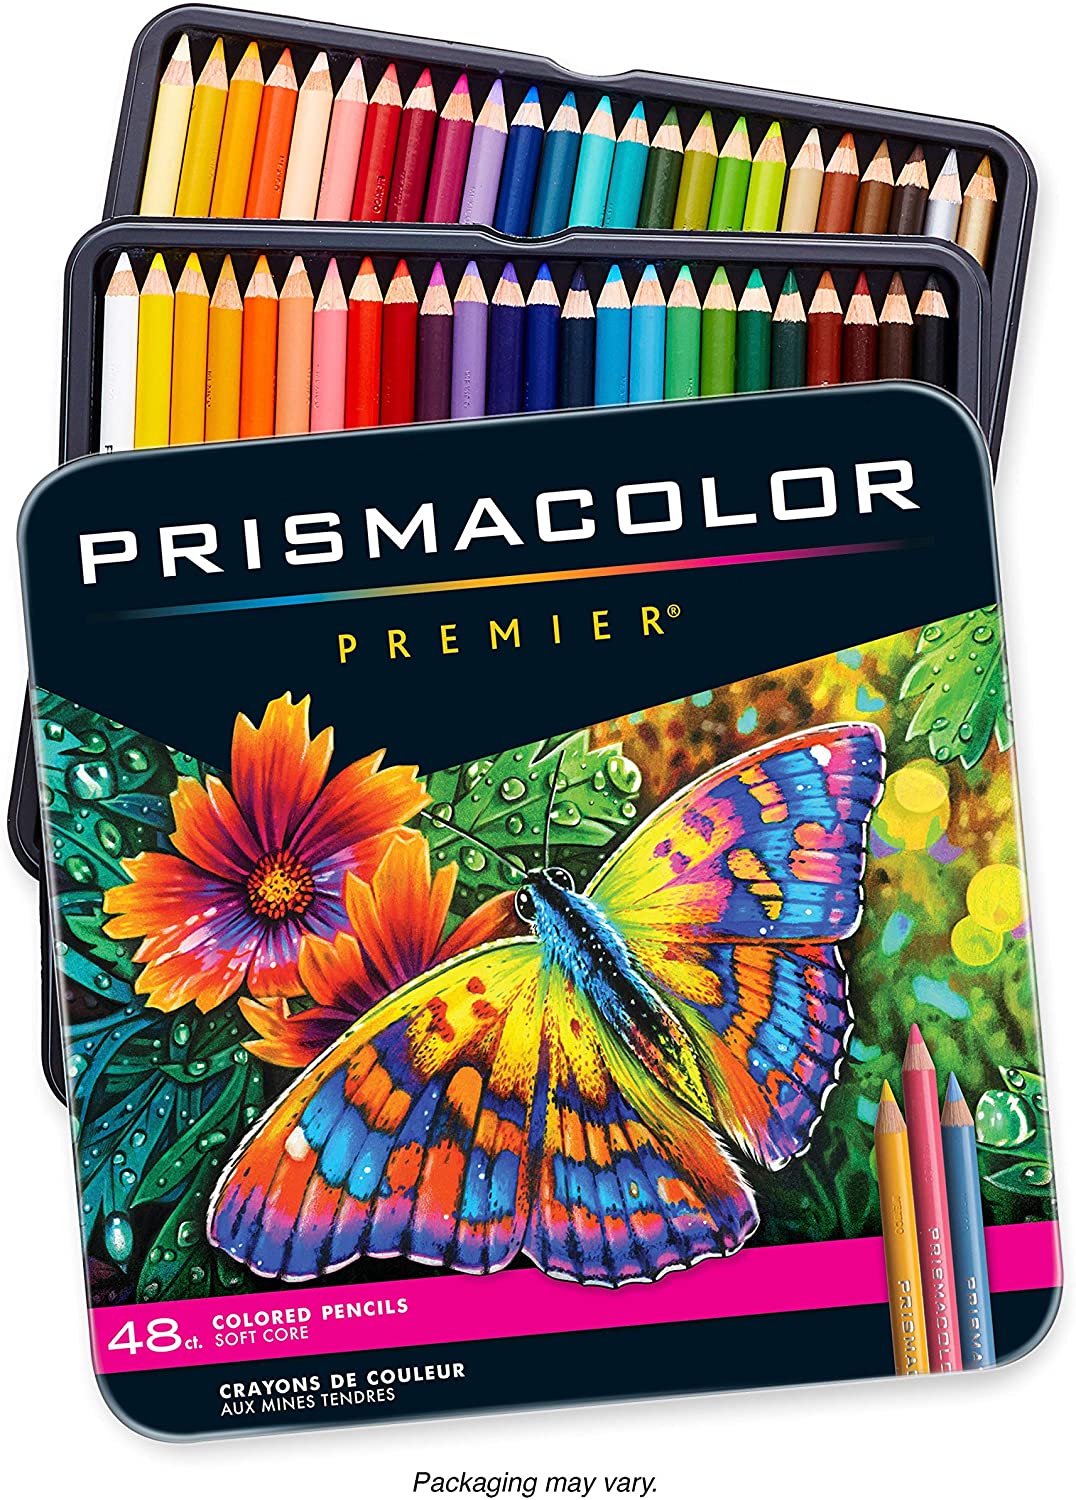 How Much Is Prismacolor Colored Pencils In Philippines